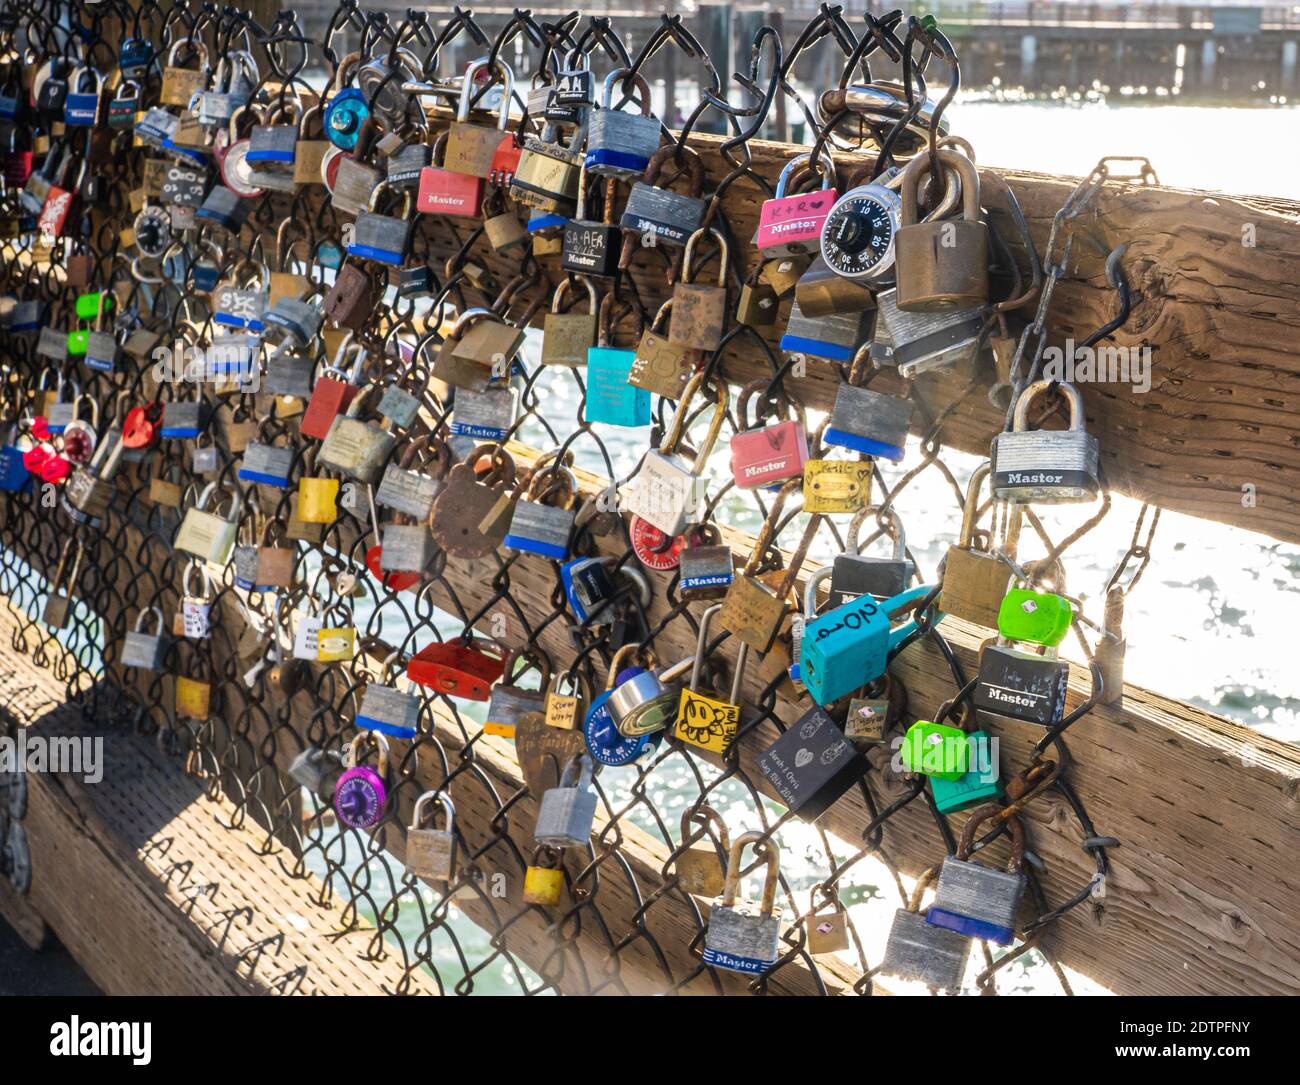 The colorful display of padlocks on Pier 39 in San Francisco represents the declaration of an unbreakable bond for many couples. Stock Photo